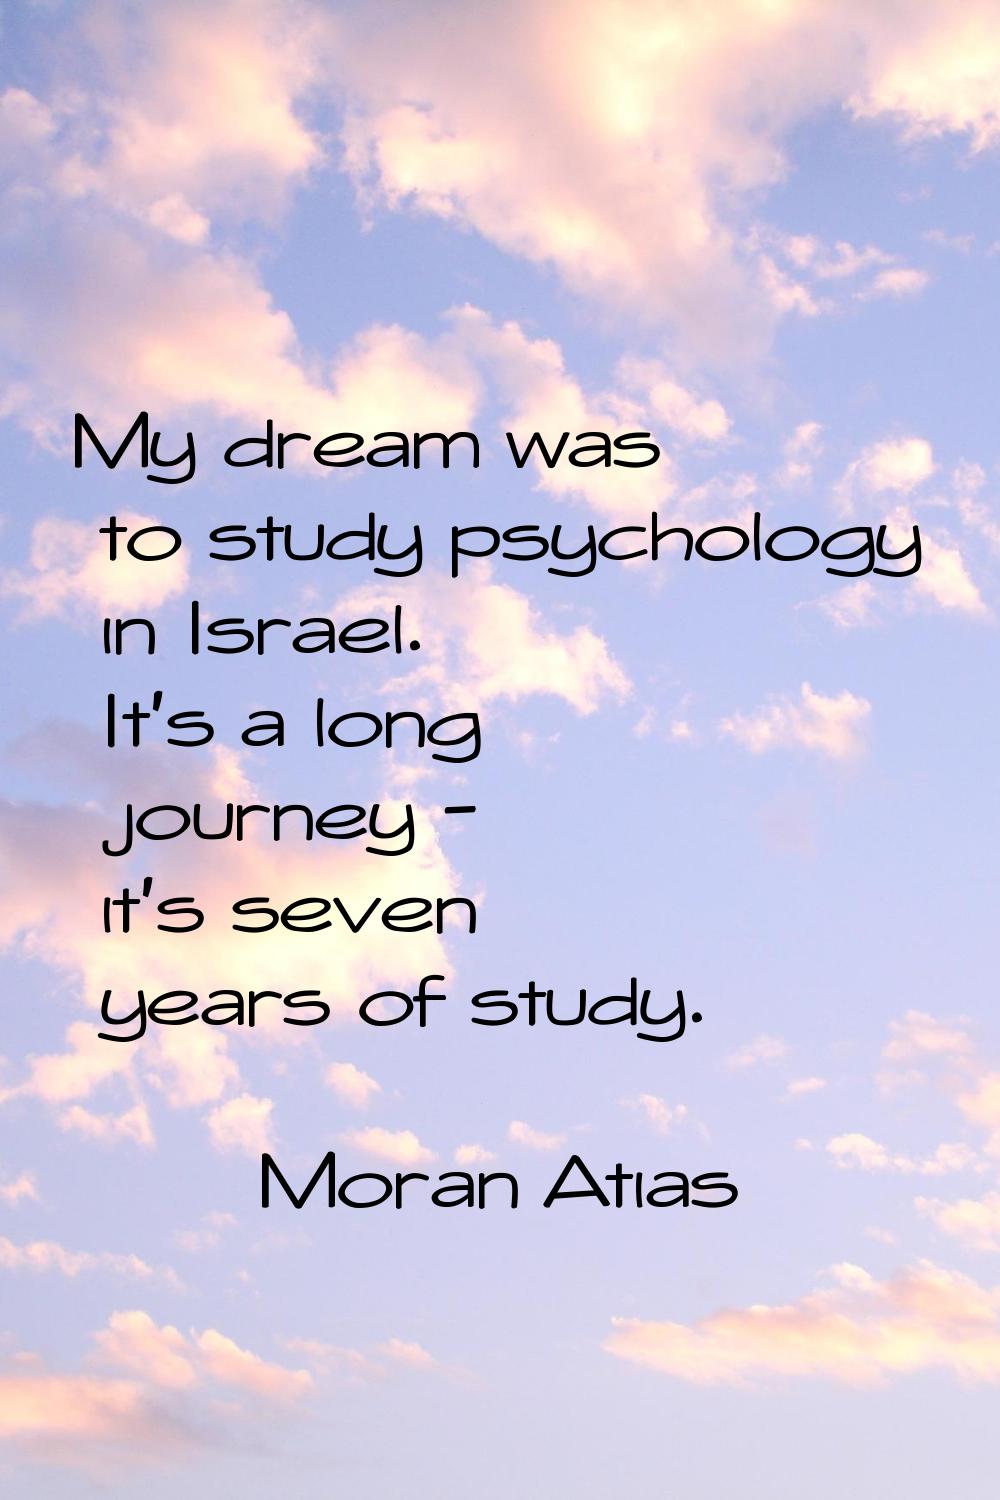 My dream was to study psychology in Israel. It's a long journey - it's seven years of study.